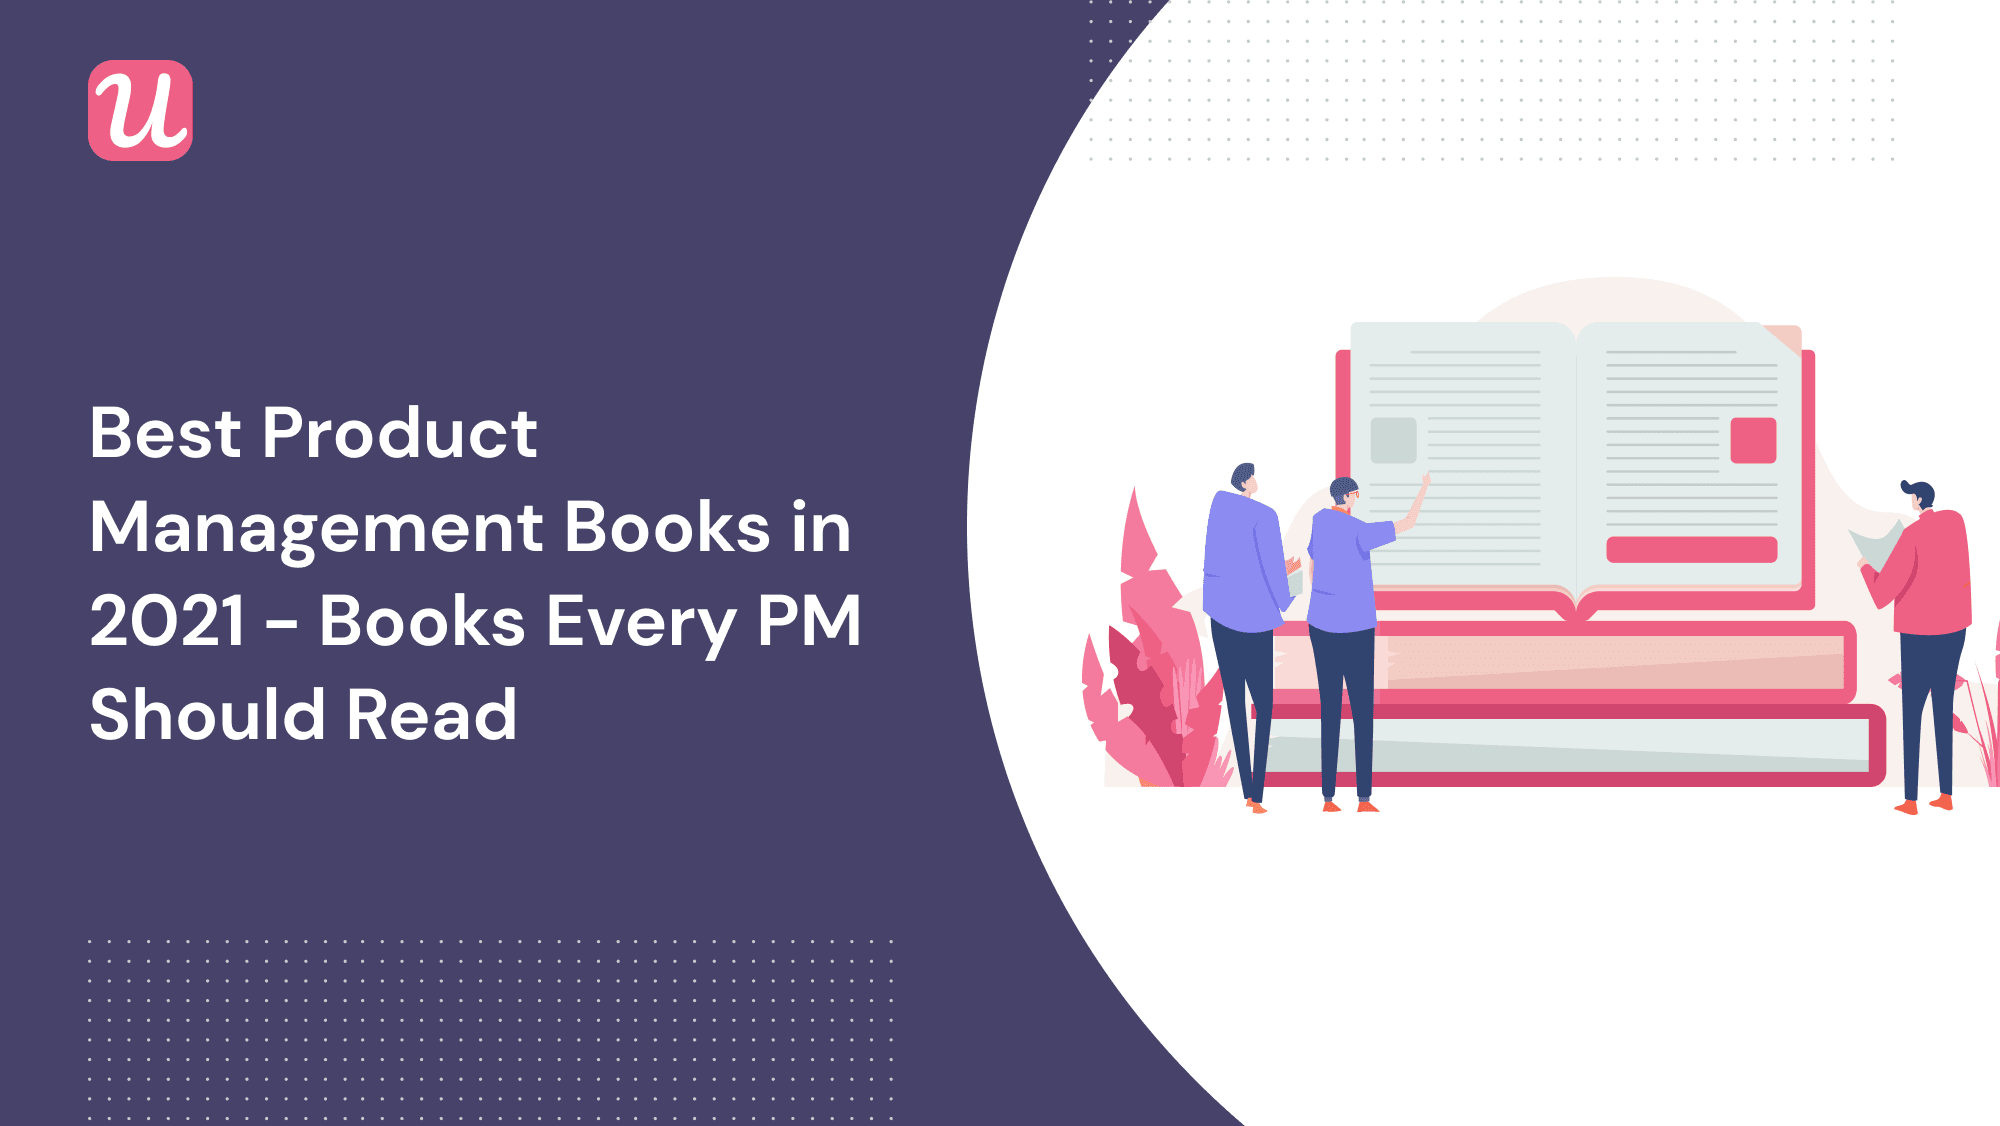 13 Best Product Management Books to Read in 2021 - Product Manager Must-Reads